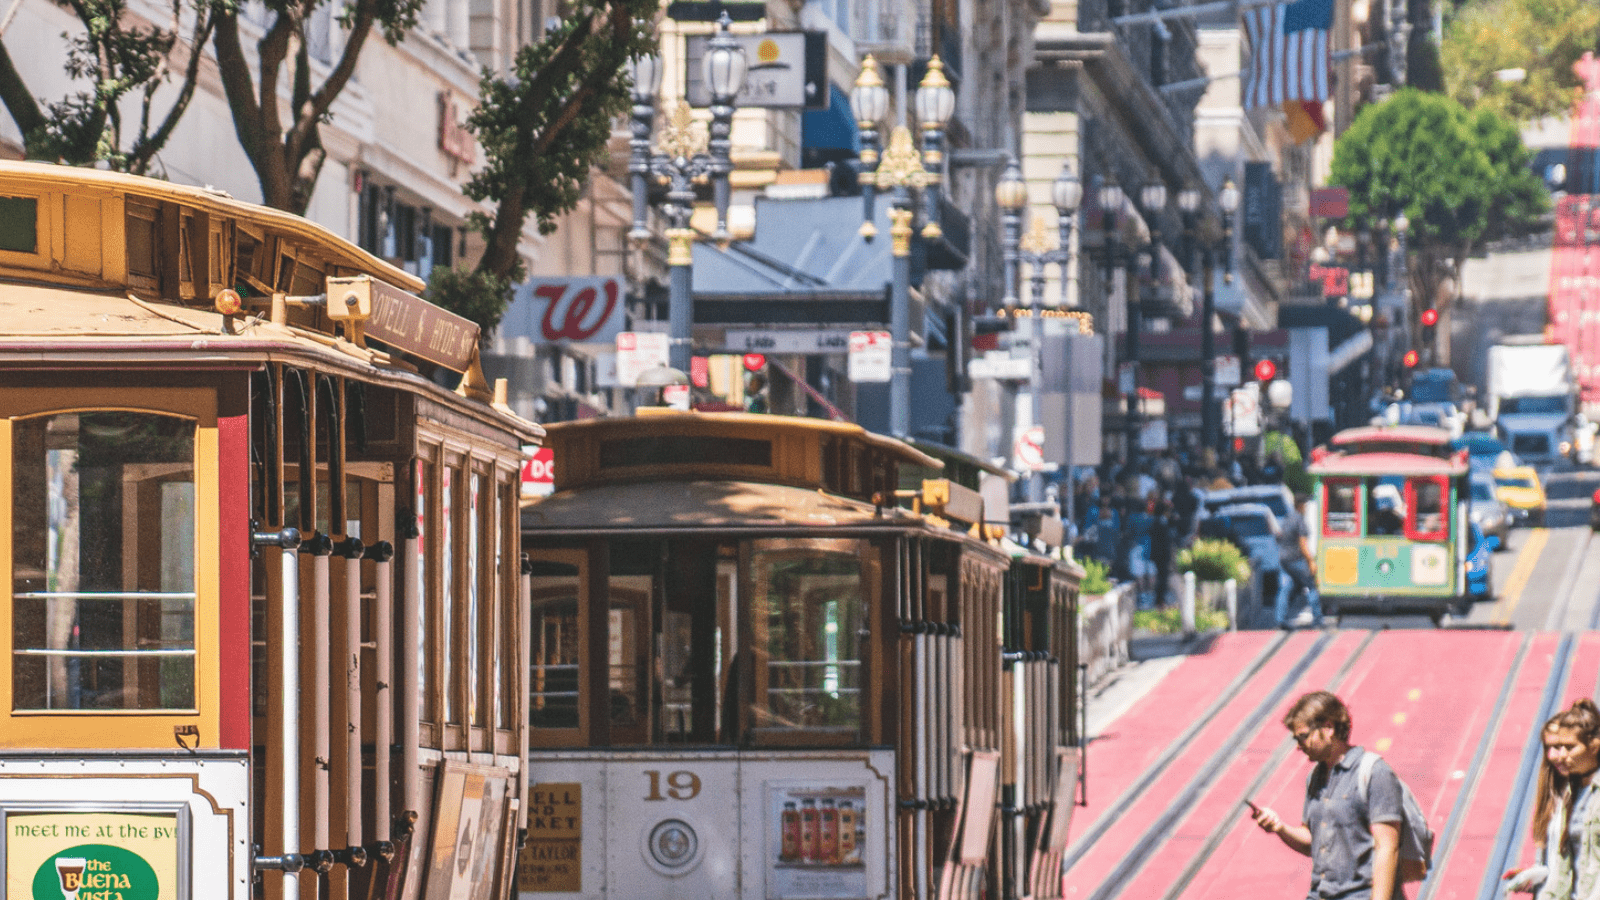 cable-cars-downtown-sf-800x450-daniel-ababia-unsplash.png